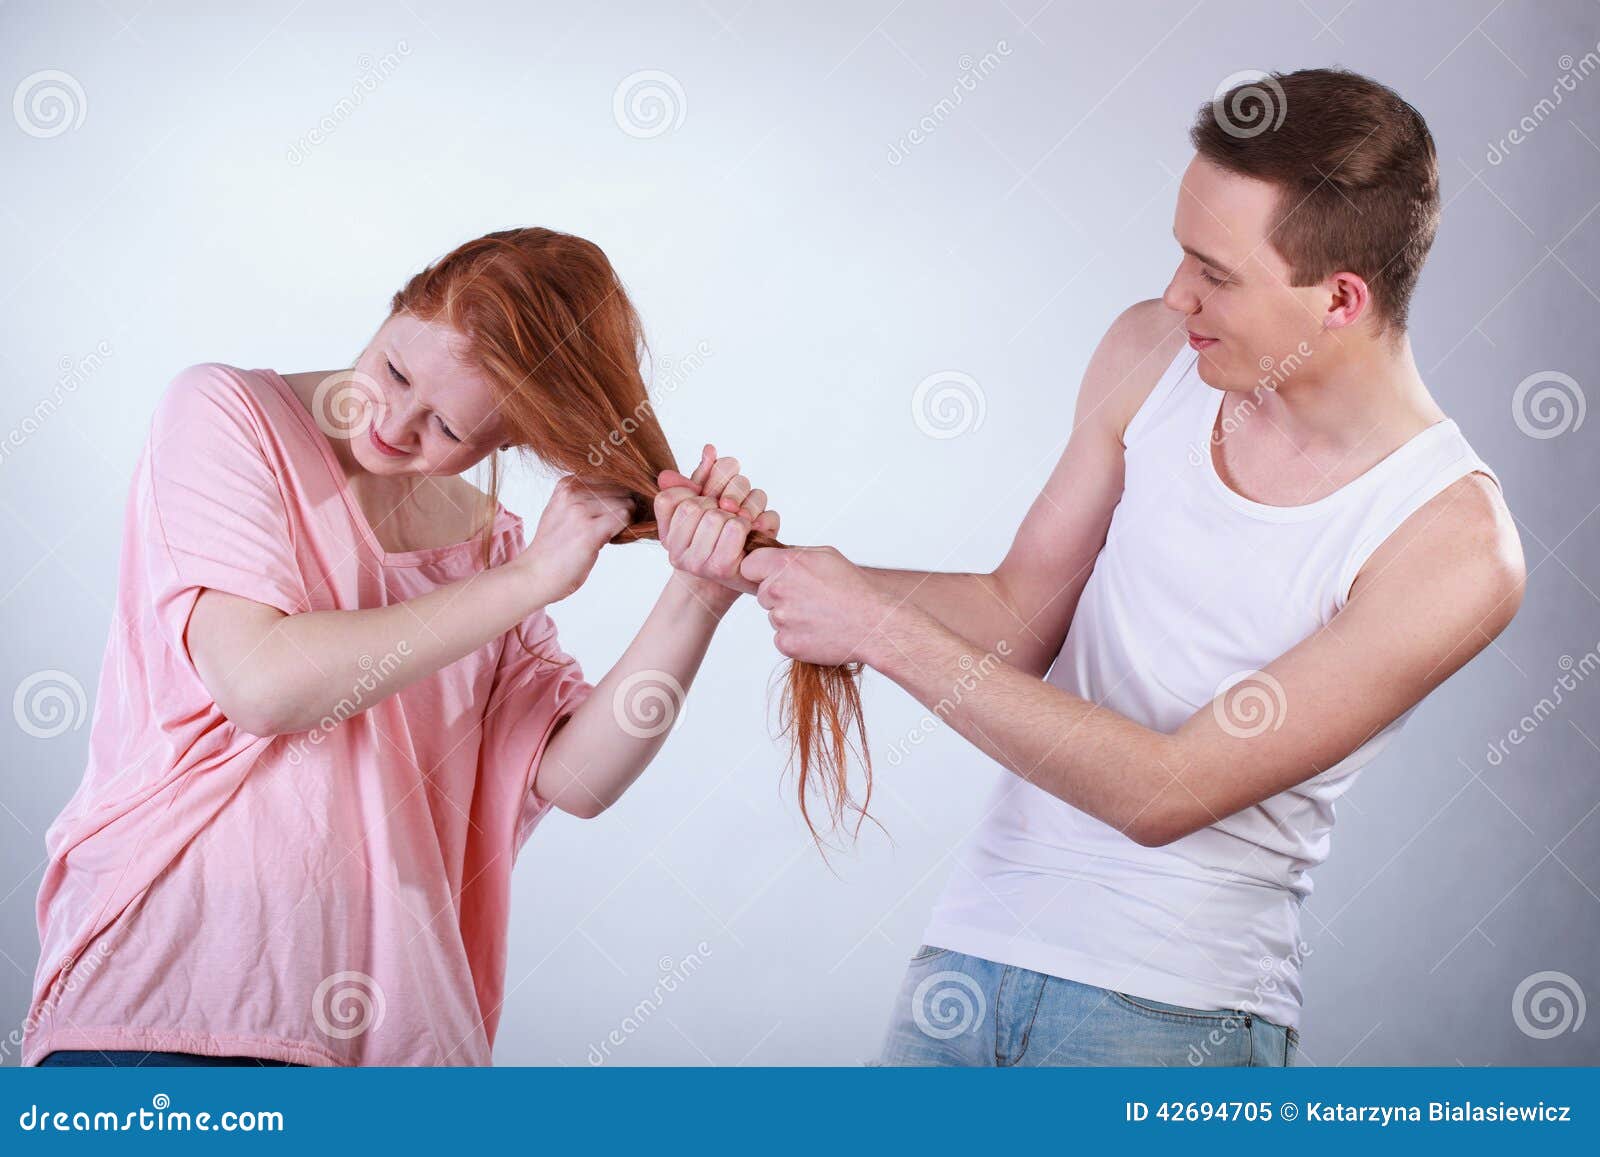 Handsome Man Playing Girlfriends Hair While Stock Photo 1114685393   Shutterstock